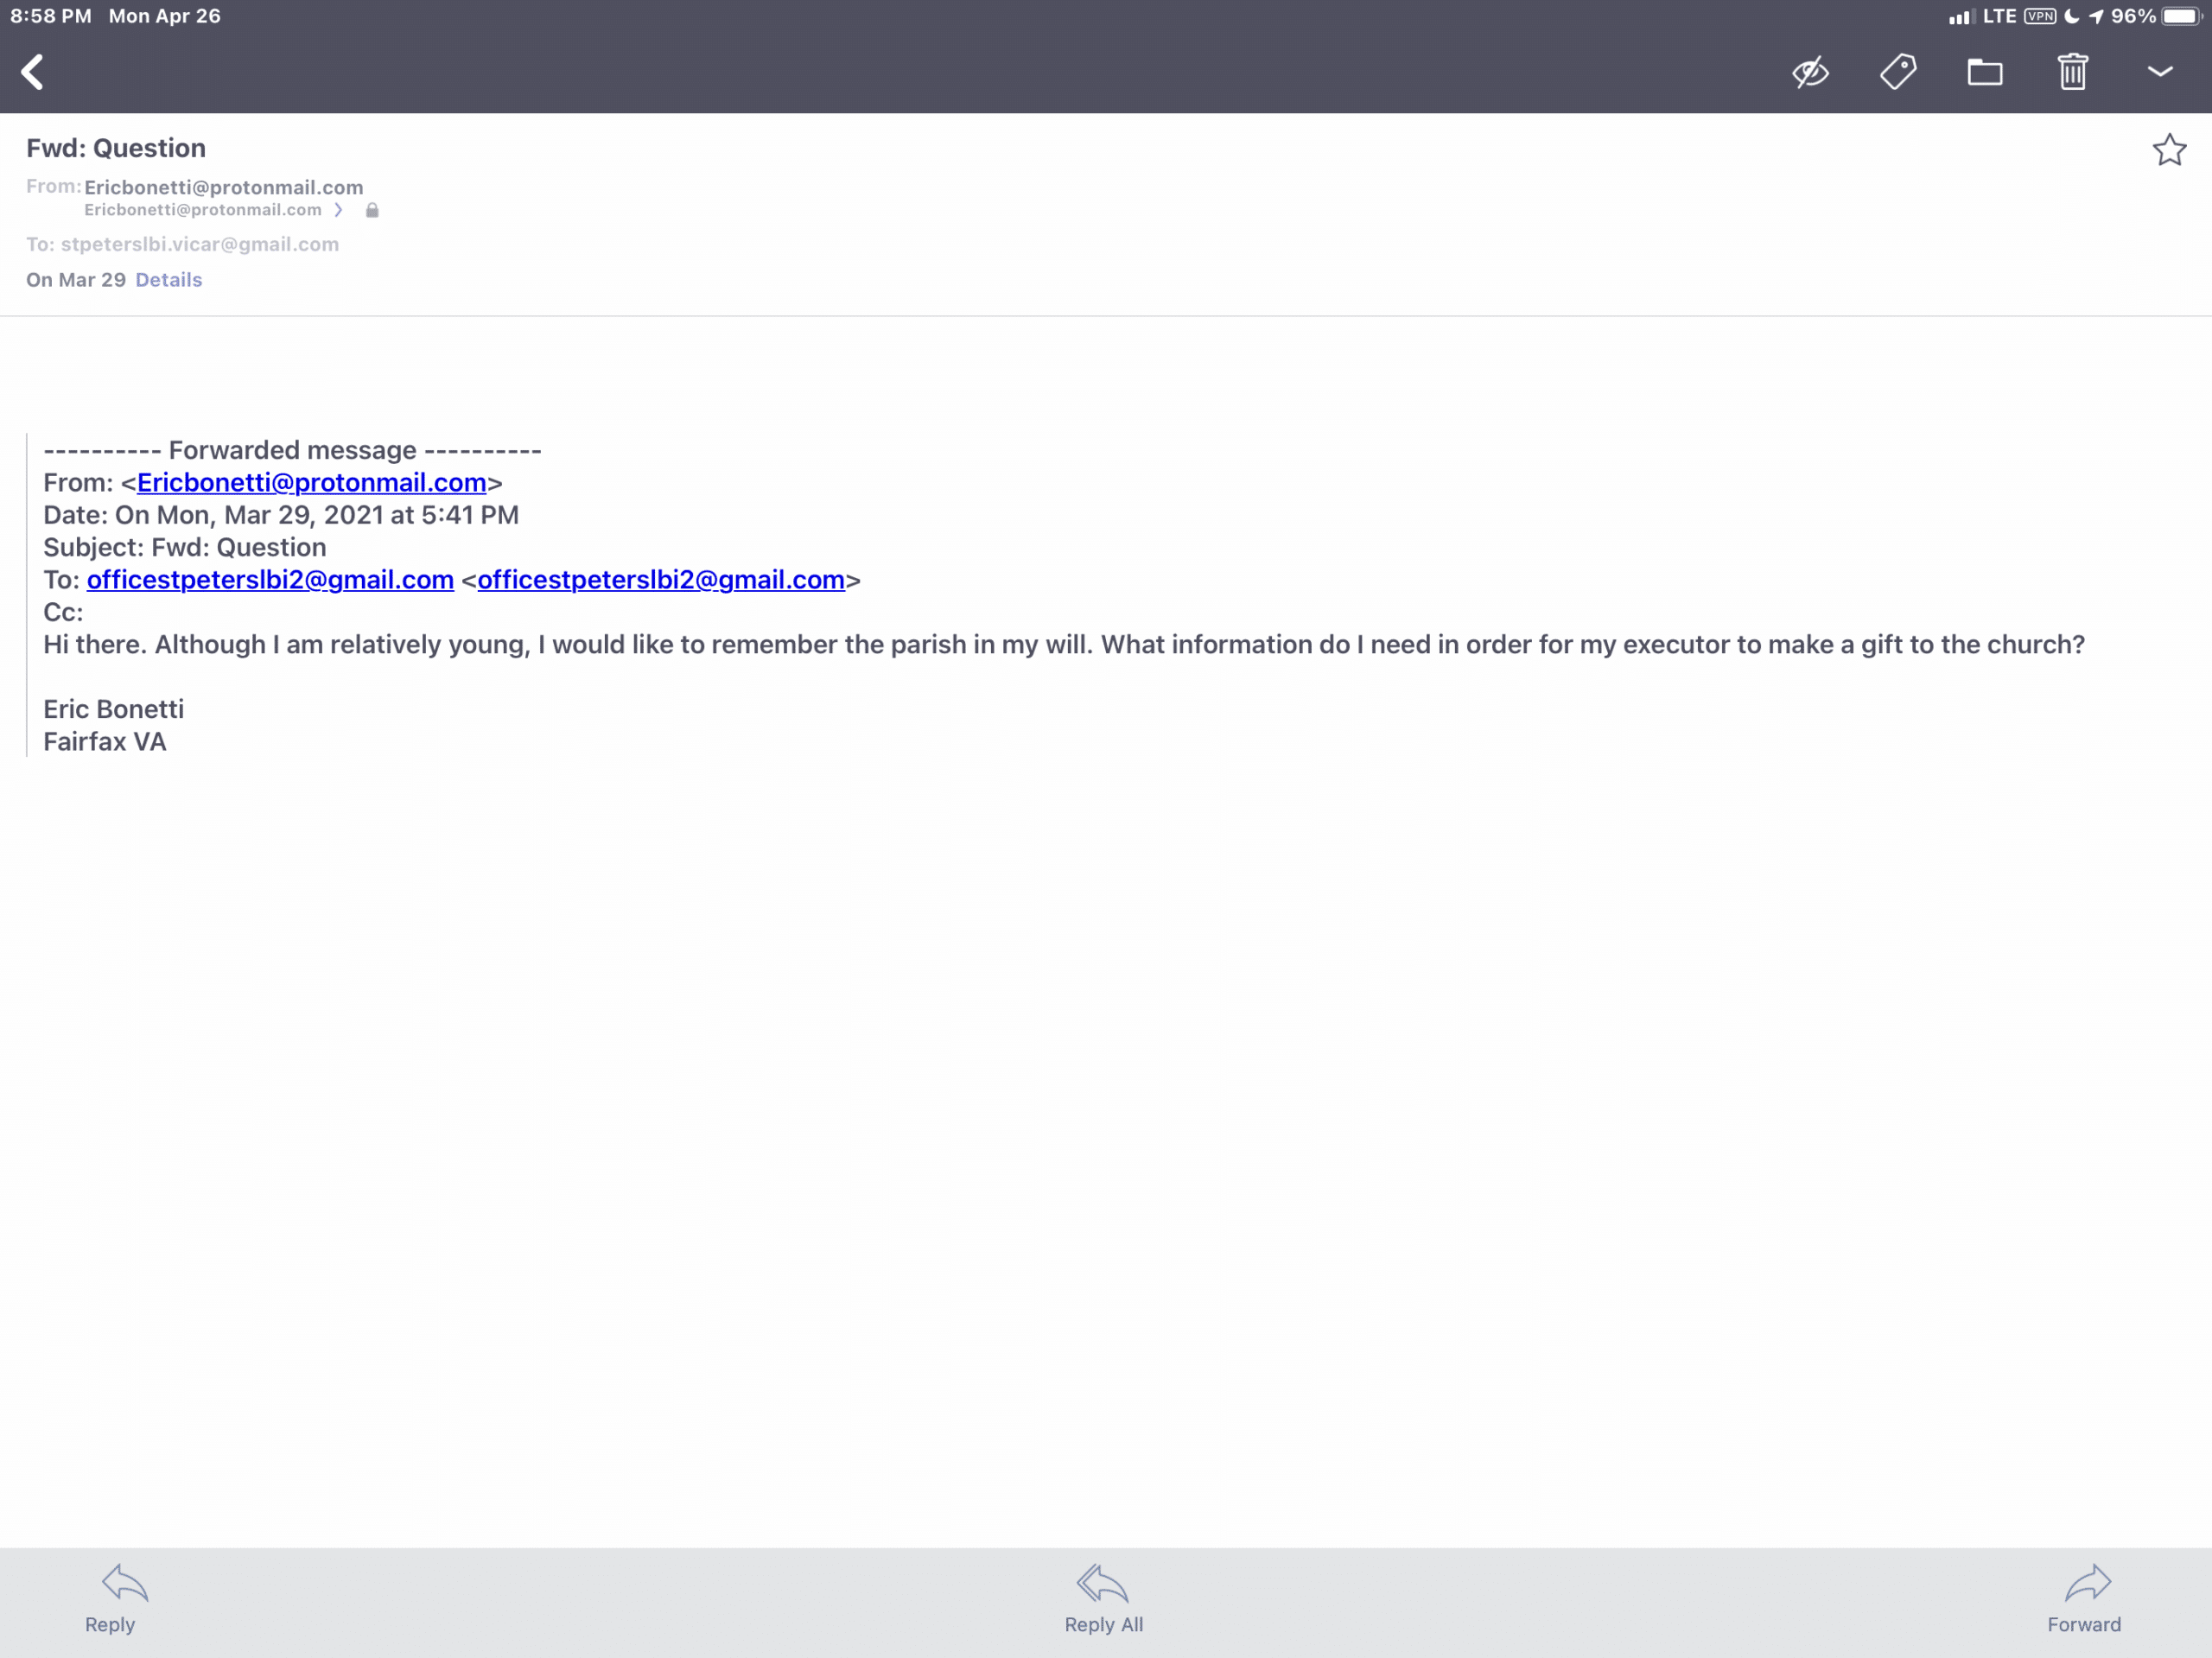 Email 3